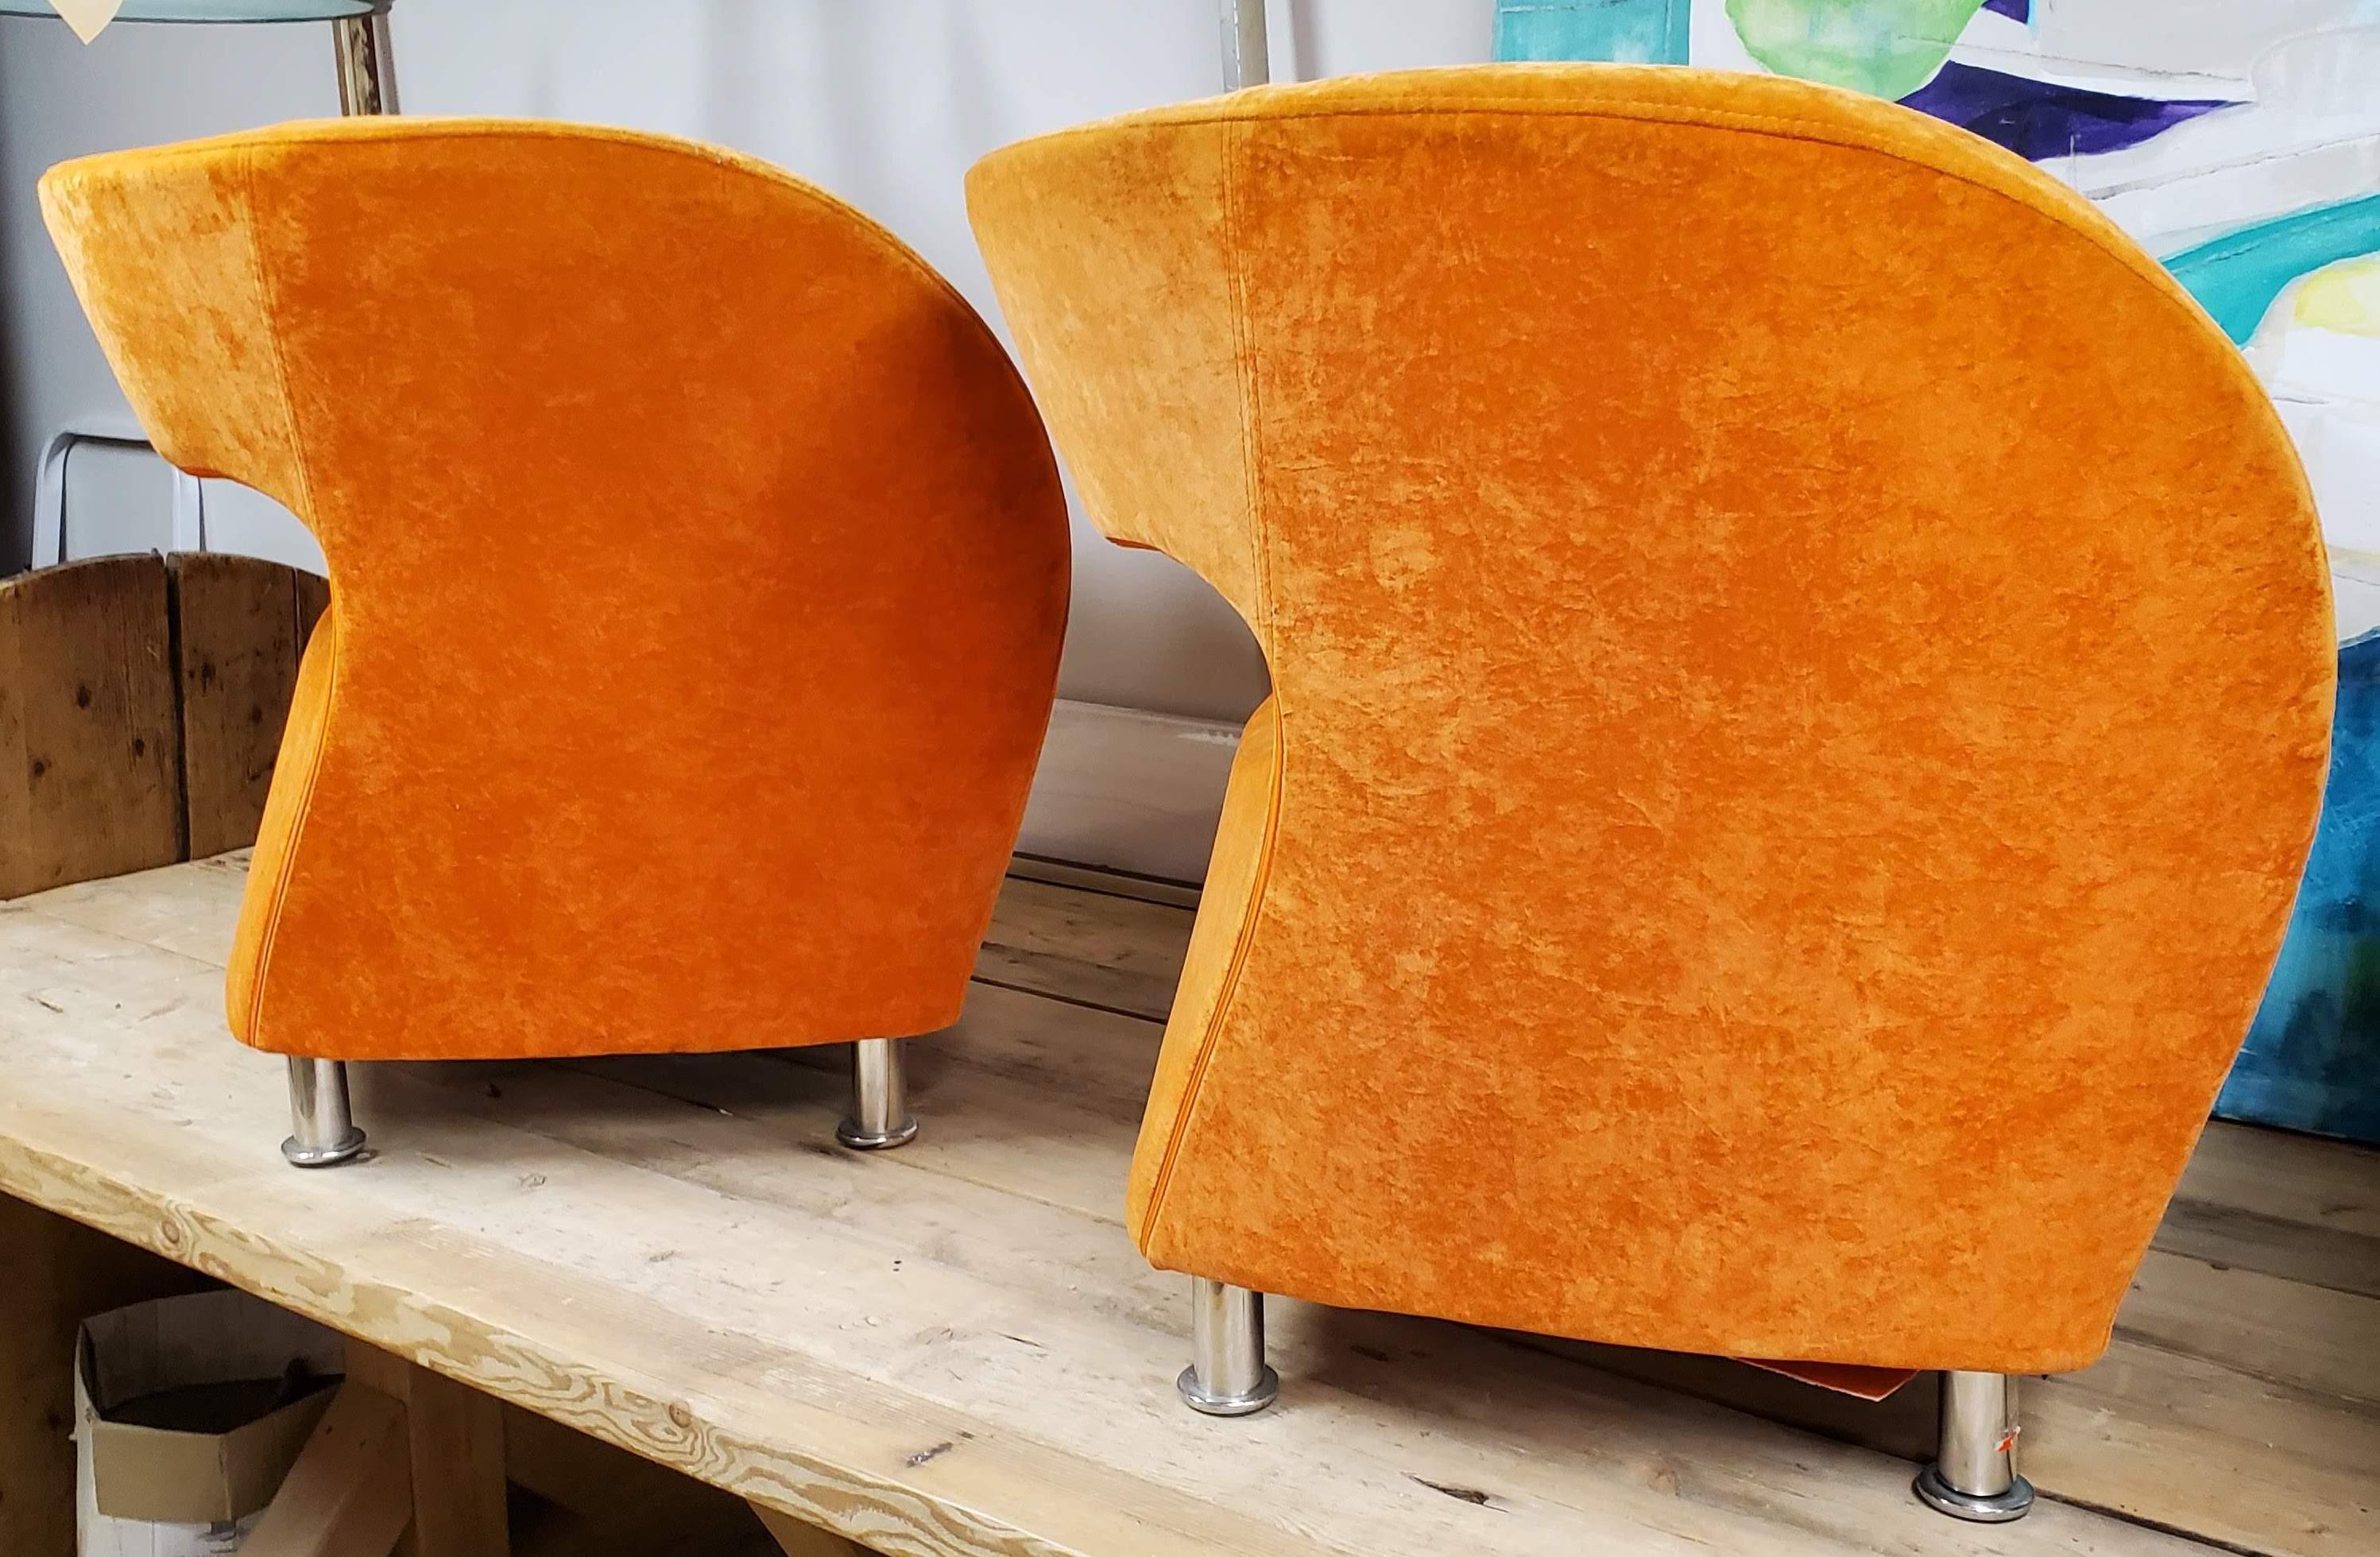 Pair of Salazar 21st century Modern style lounge club chairs. Barrel tube design for a comfortable seat. Living room, bedroom or office. Circa 2000s.
Measures: 27” H 26” W 28” D.
  